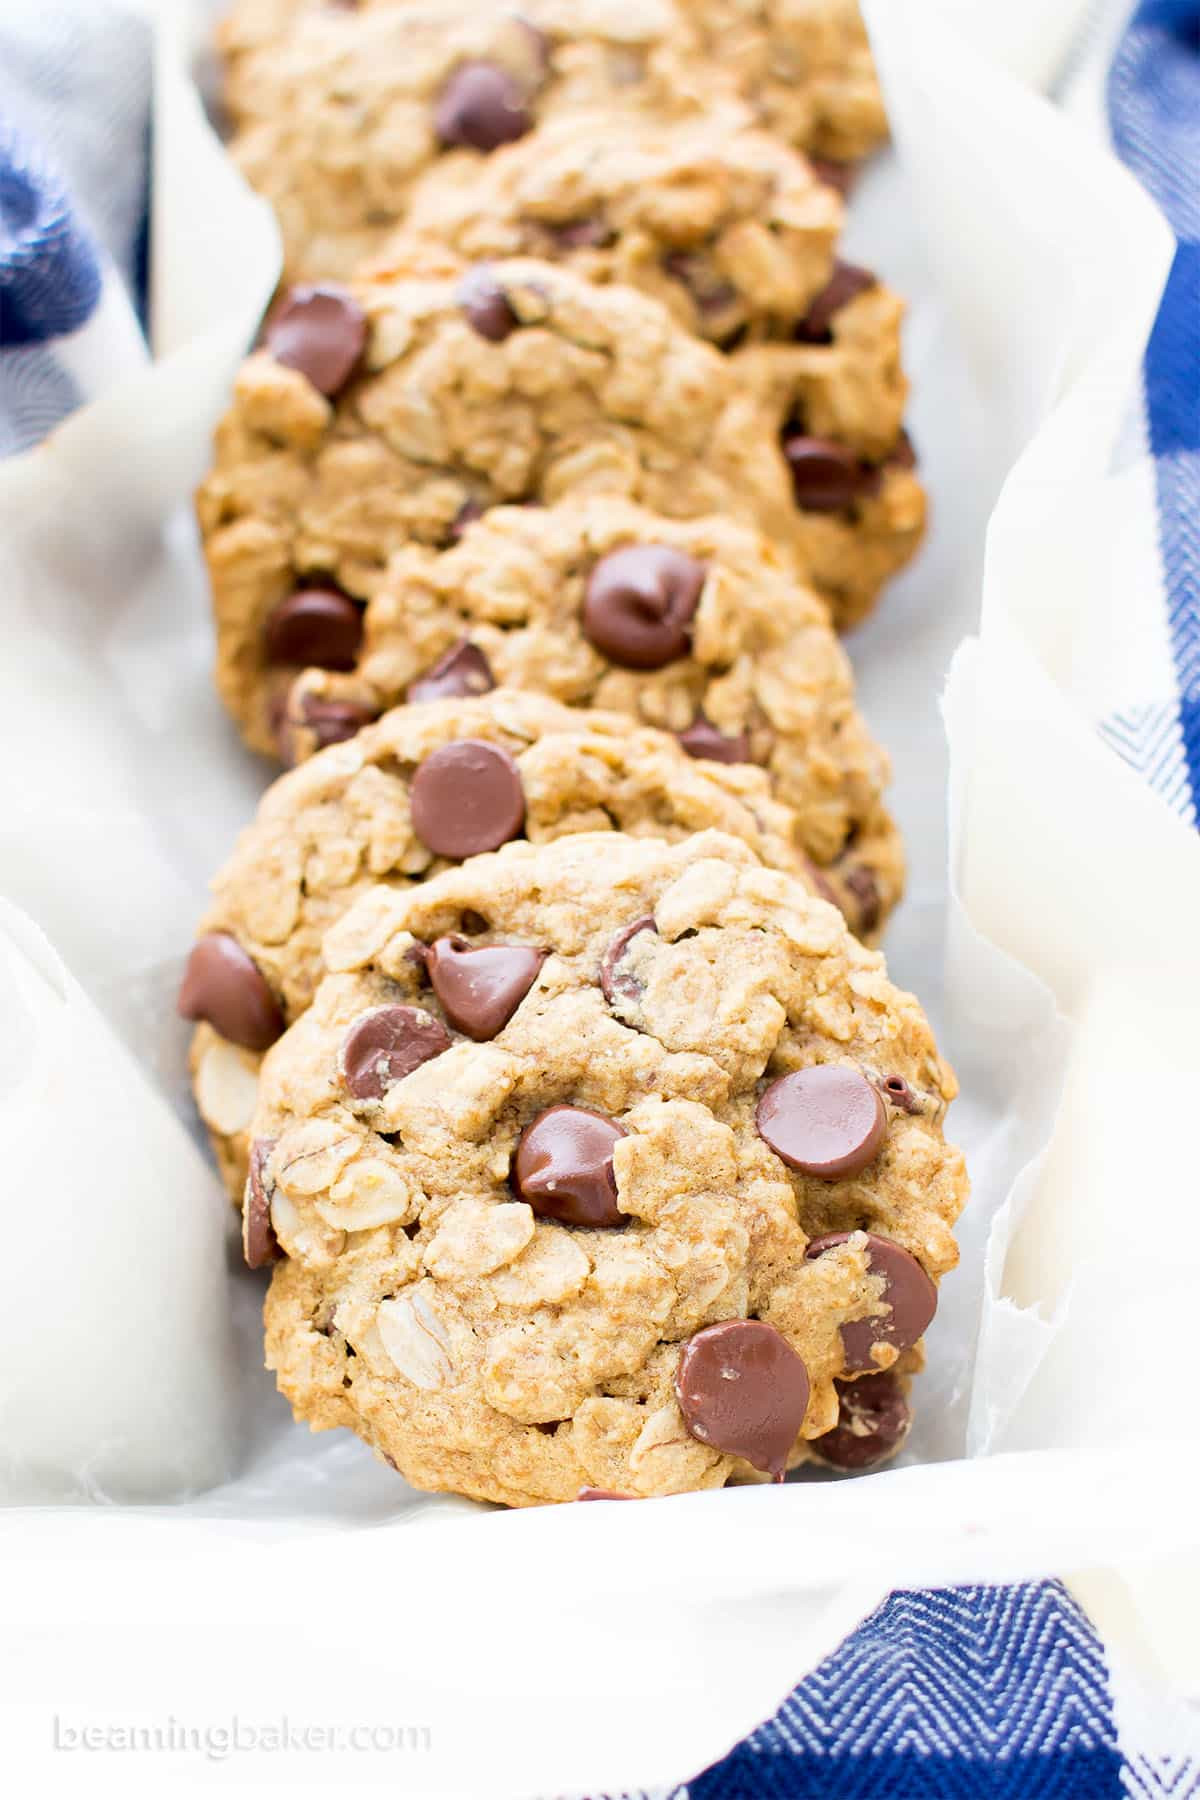 Gluten Dairy And Soy Free Recipes
 Gluten Free Vegan Oatmeal Chocolate Chip Cookies V GF